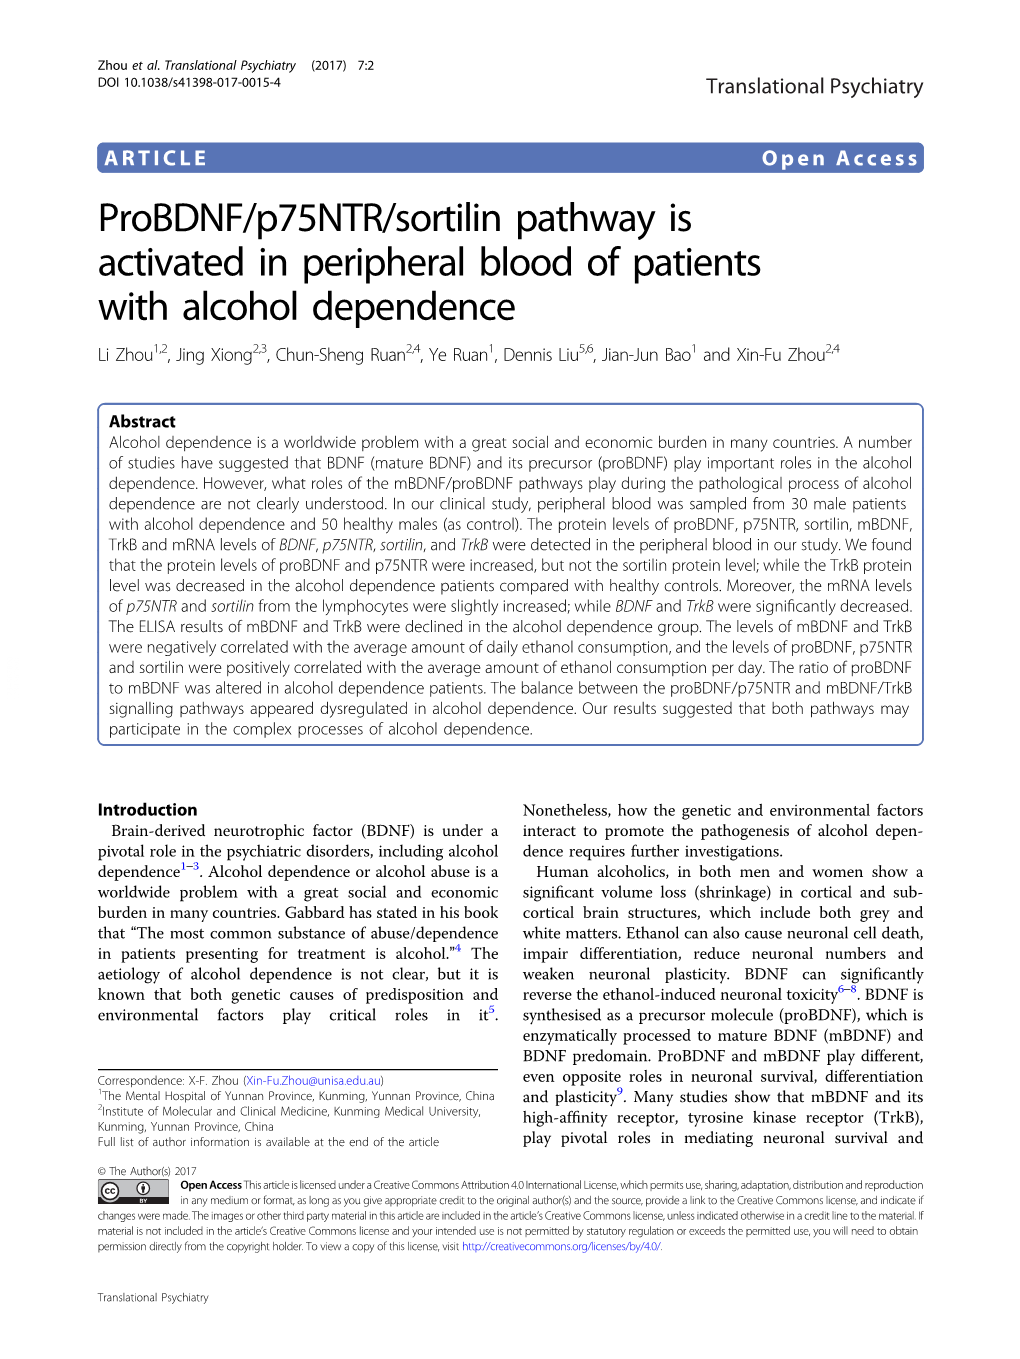 Probdnf/P75ntr/Sortilin Pathway Is Activated in Peripheral Blood of Patients with Alcohol Dependence